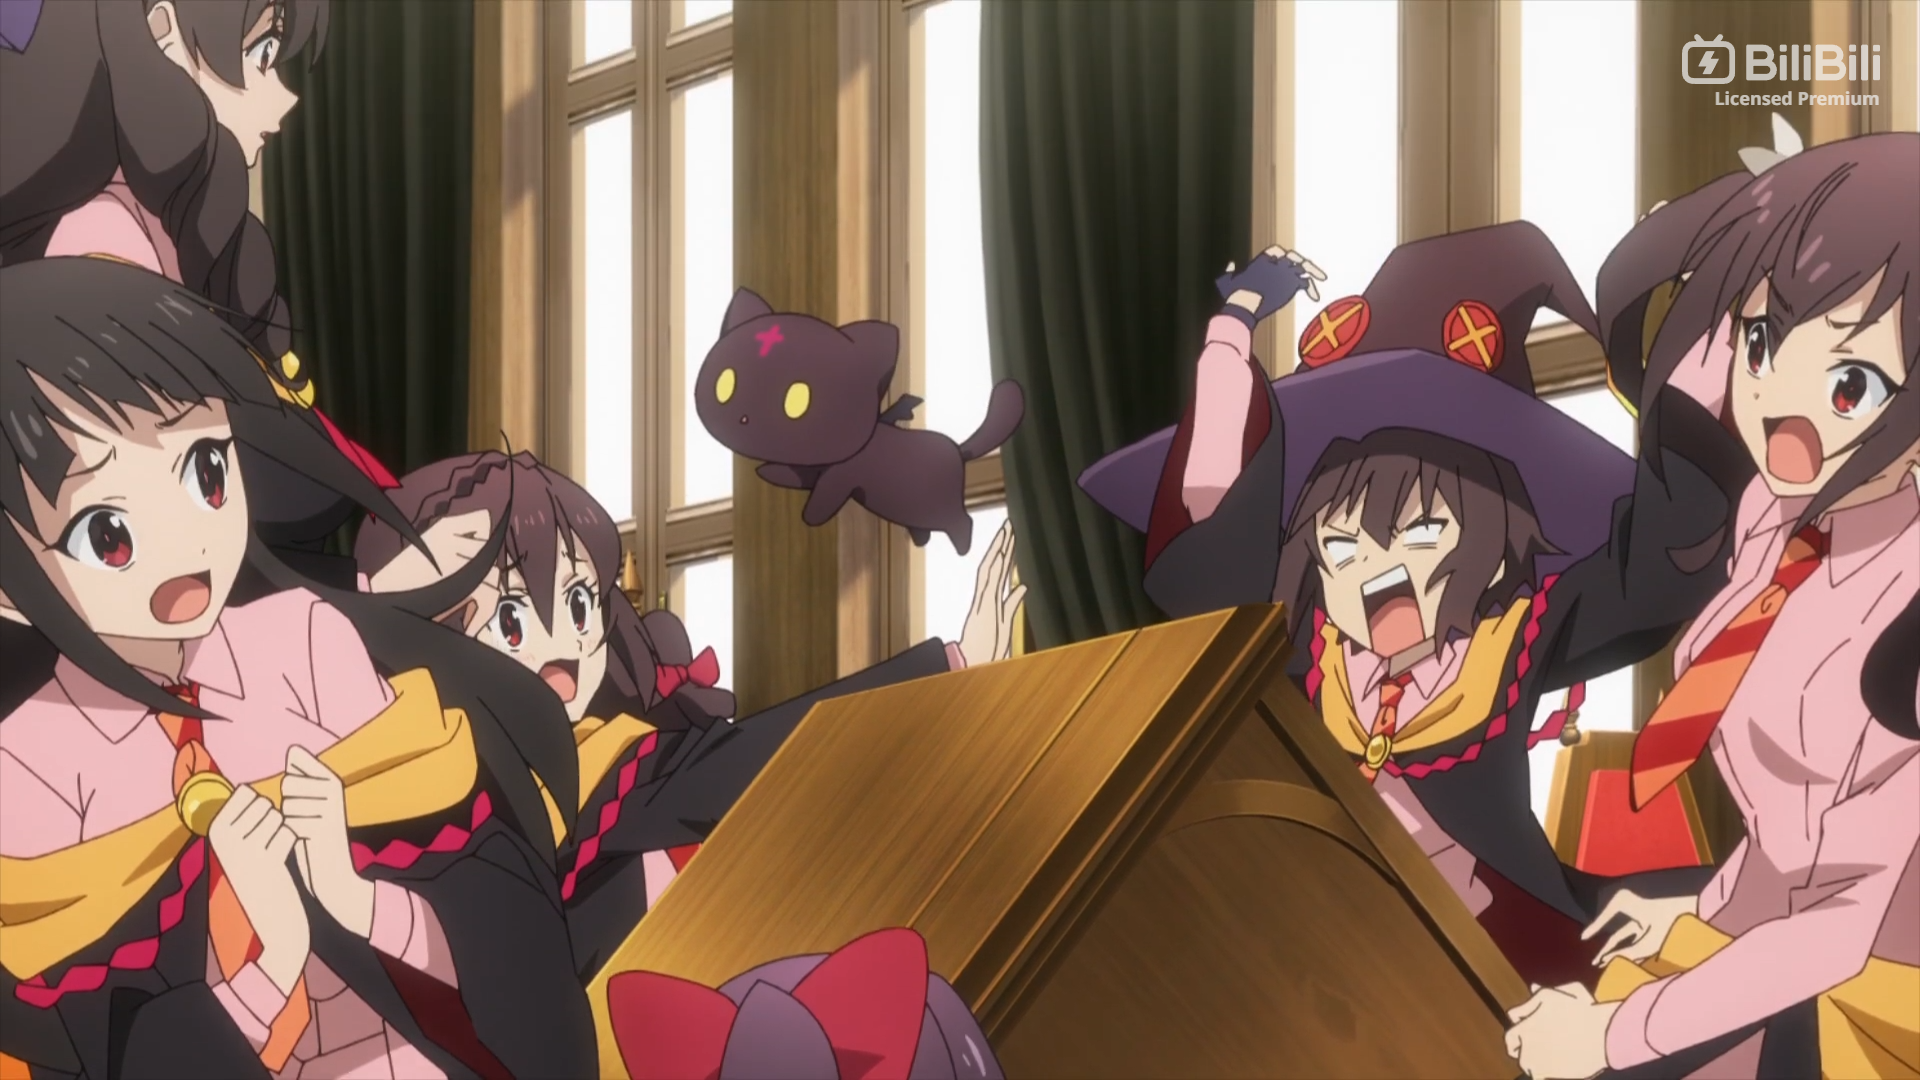 KONOSUBA Megumin Spinoff Is Here! An Explosion on This Wonderful World  Episode 1 Was PERFECTION! 